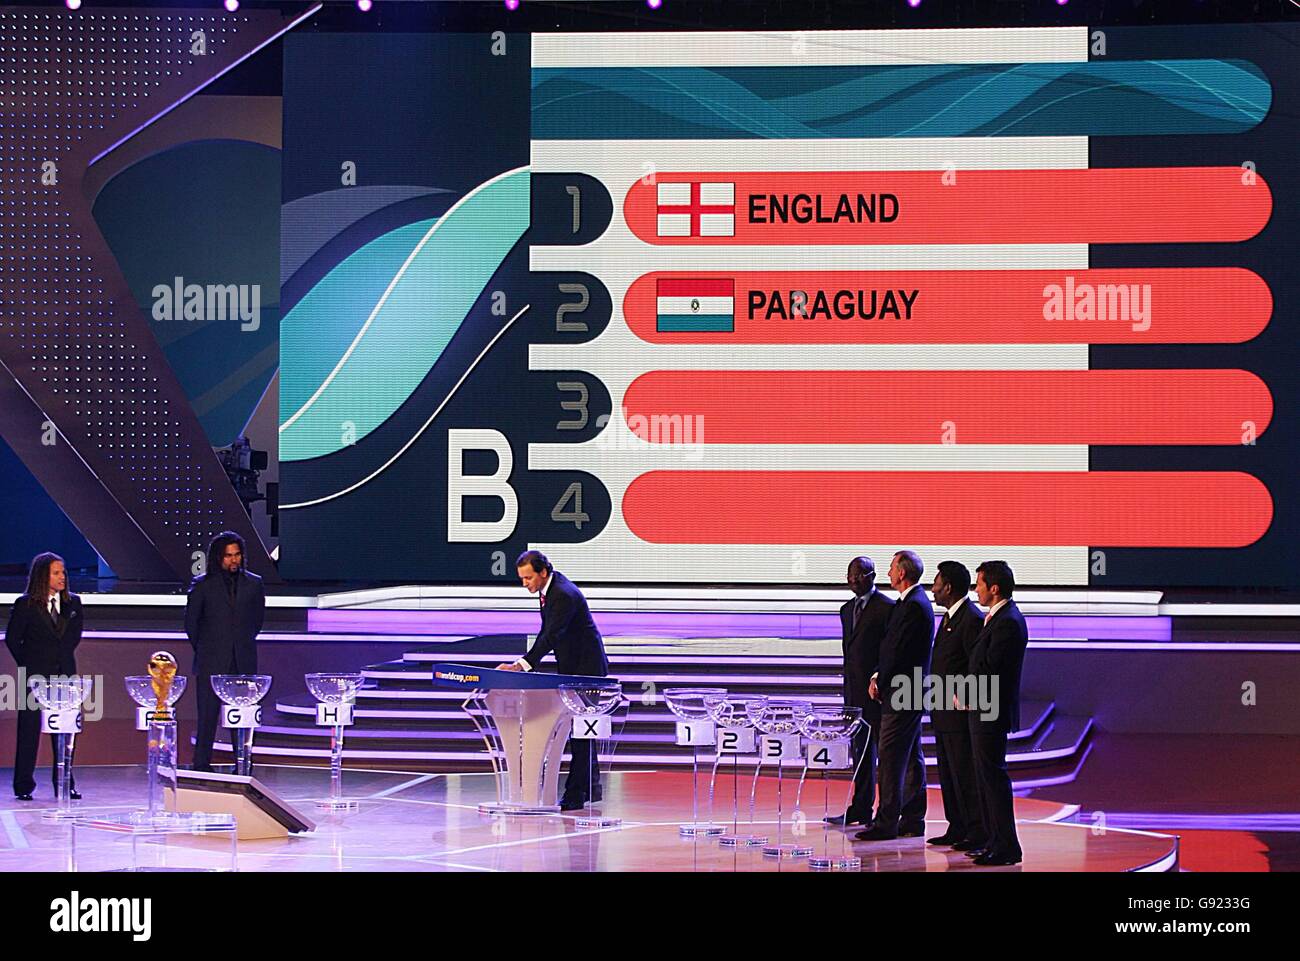 Soccer - 2006 FIFA World Cup Germany - Final Draw - Messe Leipzig. England are grouped with Paraguay in the 2006 FIFA World Cup final draw. Stock Photo